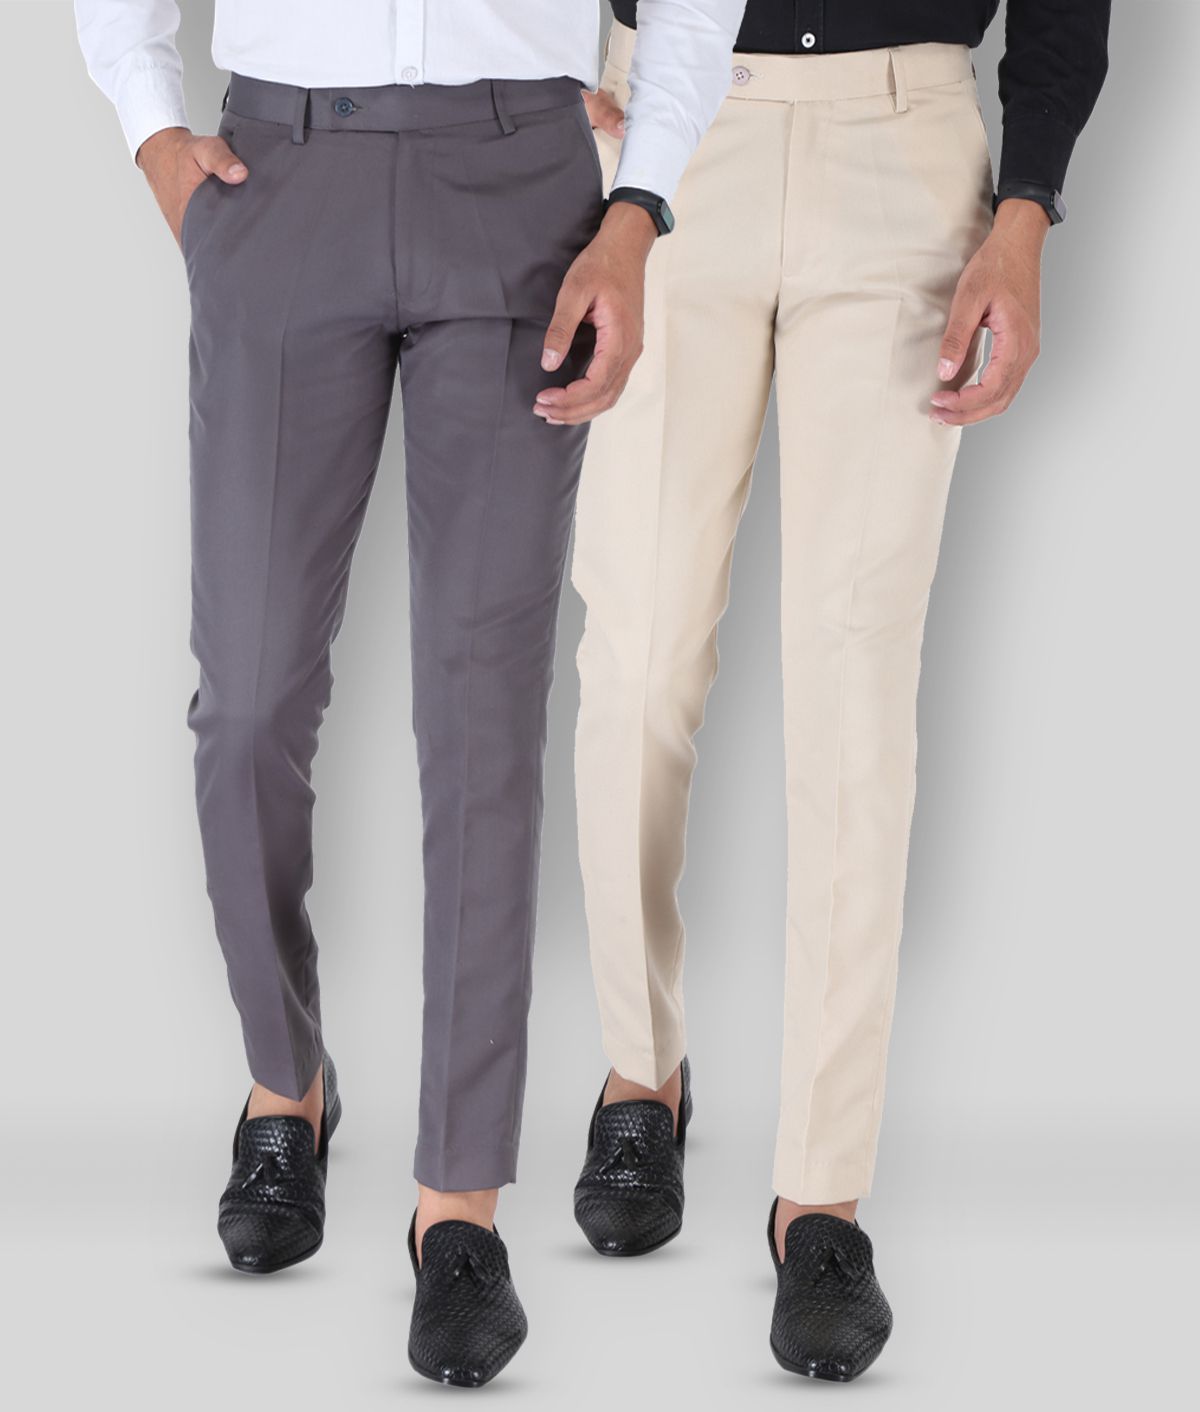     			SREY - Grey Polycotton Slim - Fit Men's Chinos ( Pack of 2 )